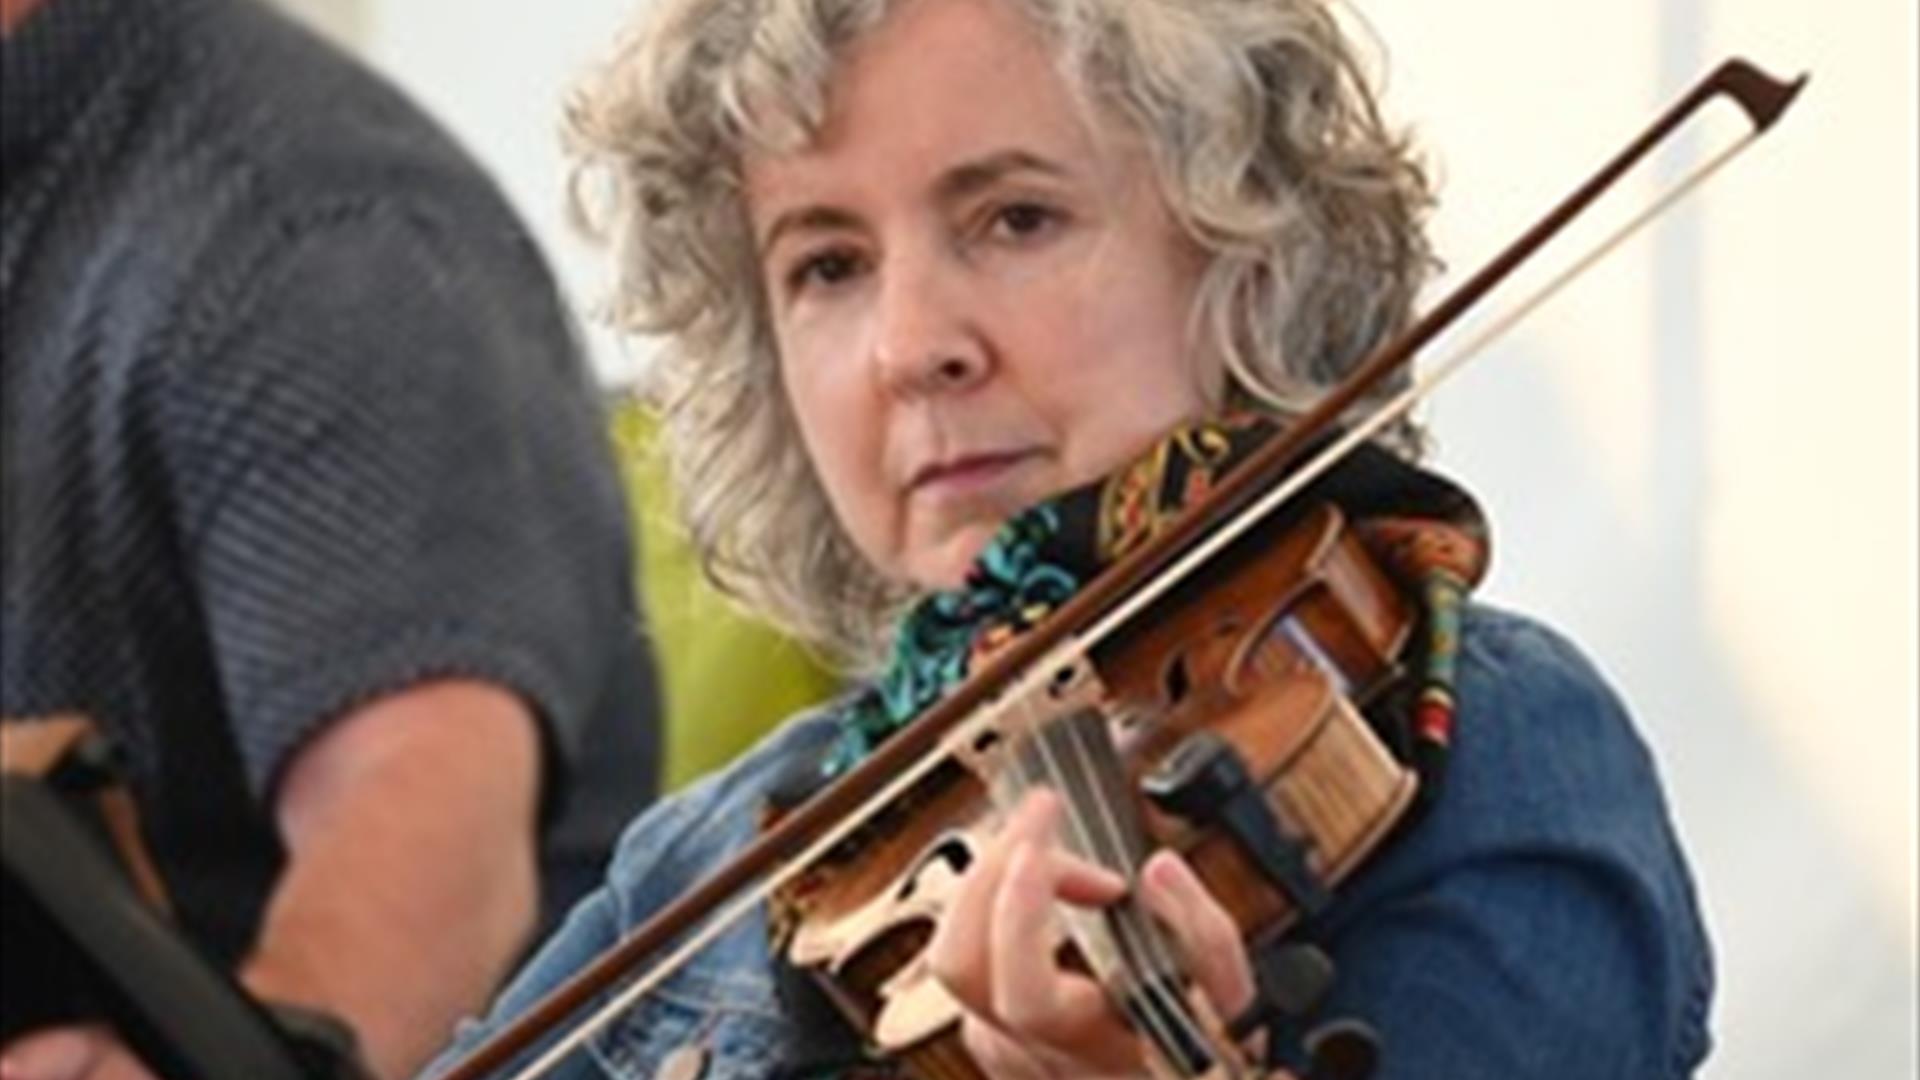 Image shows lady playing the fiddle.  She is wearing a navy blue top and has short grey hair.